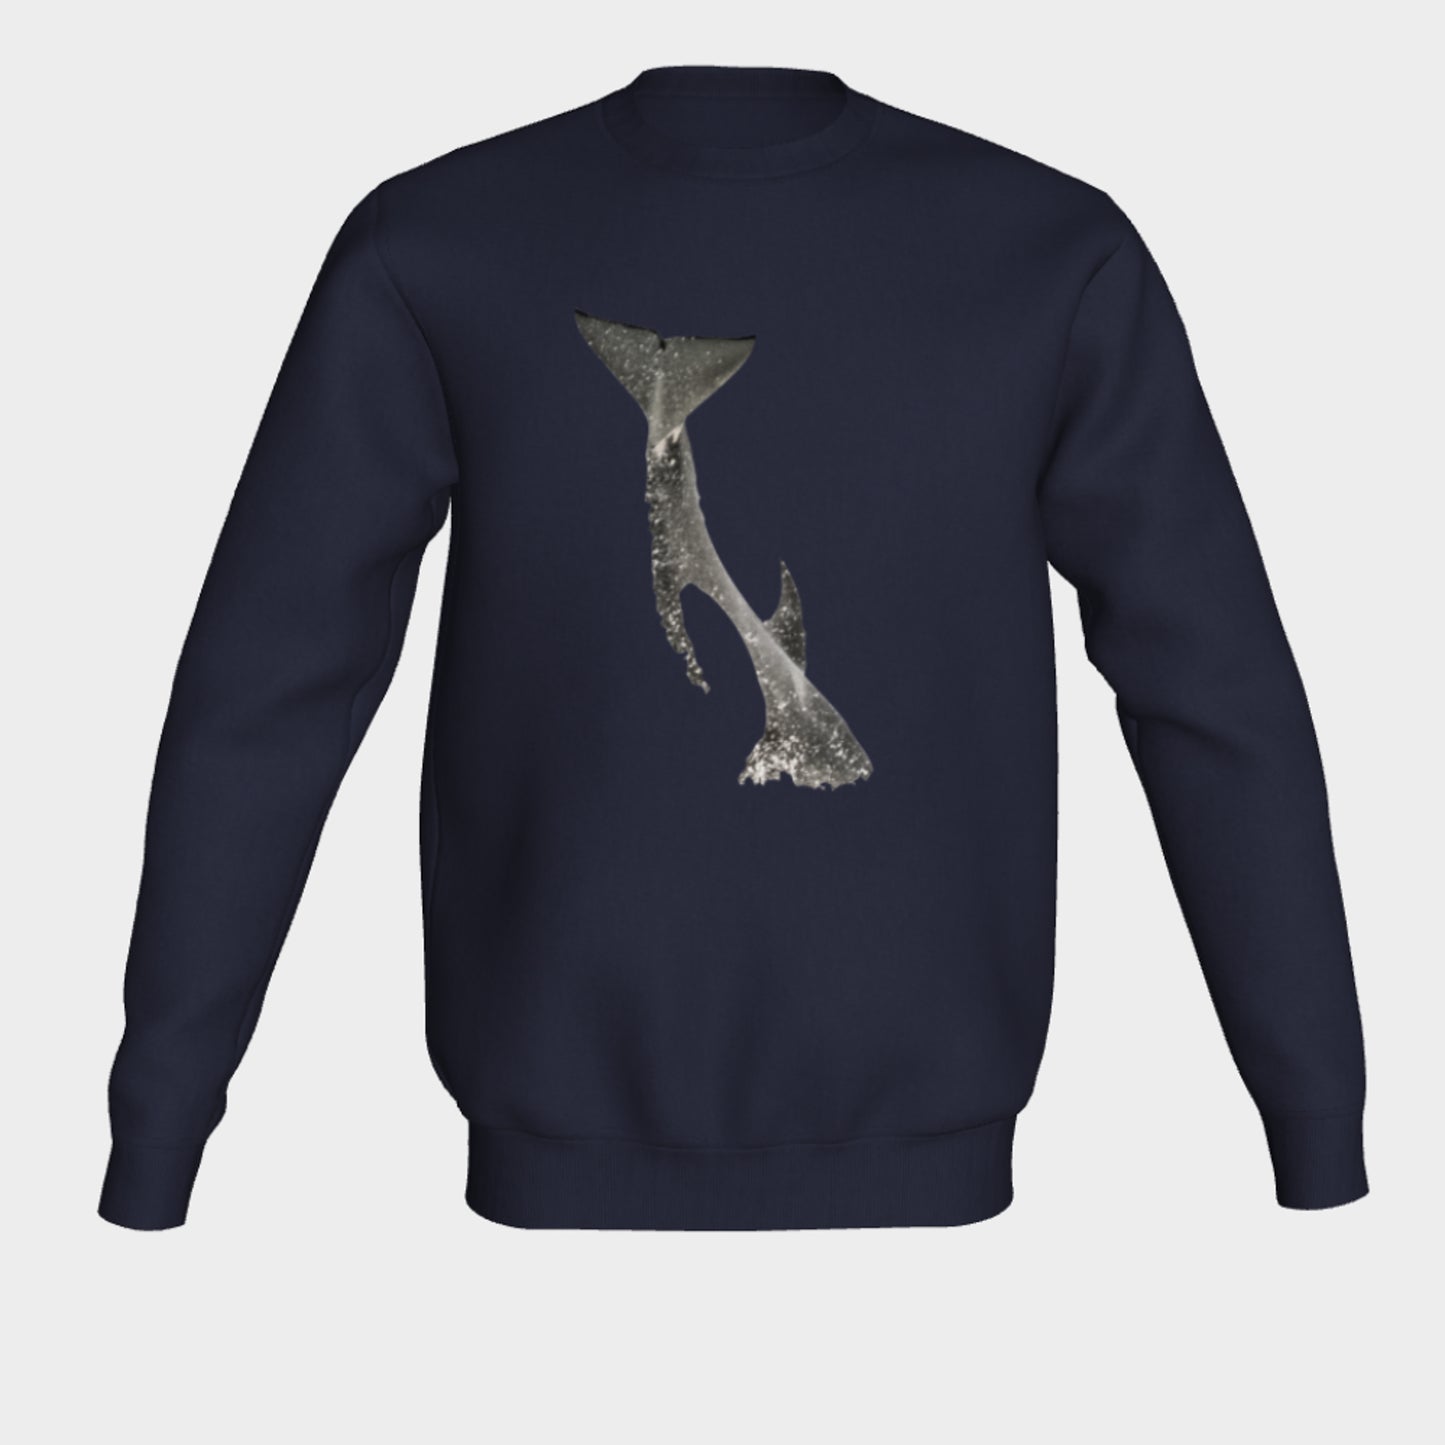 Orca Breach Crewneck Sweatshirt What’s better than a super cozy sweatshirt? A super cozy sweatshirt from Van Isle Goddess!  Super cozy unisex sweatshirt for those chilly days.  Excellent for men or women.   Fit is roomy and comfortable